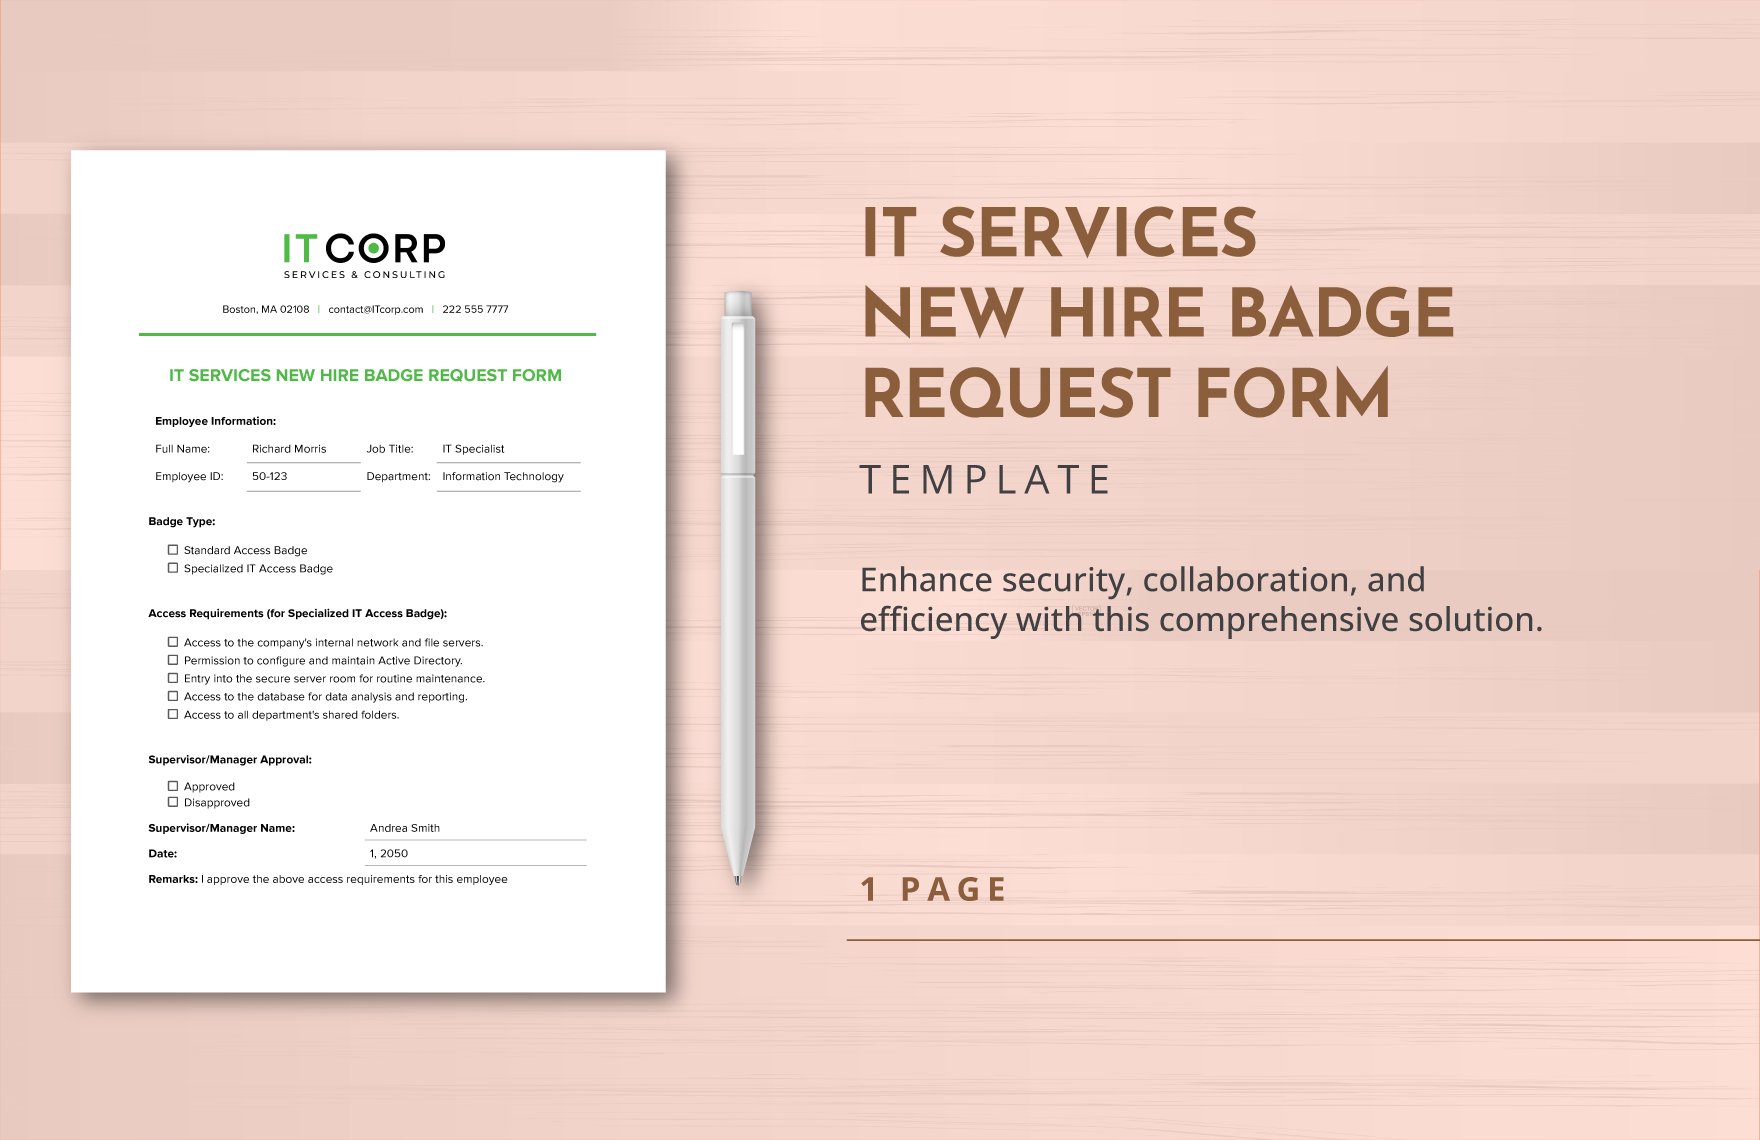 IT Services New Hire Badge Request Form Template